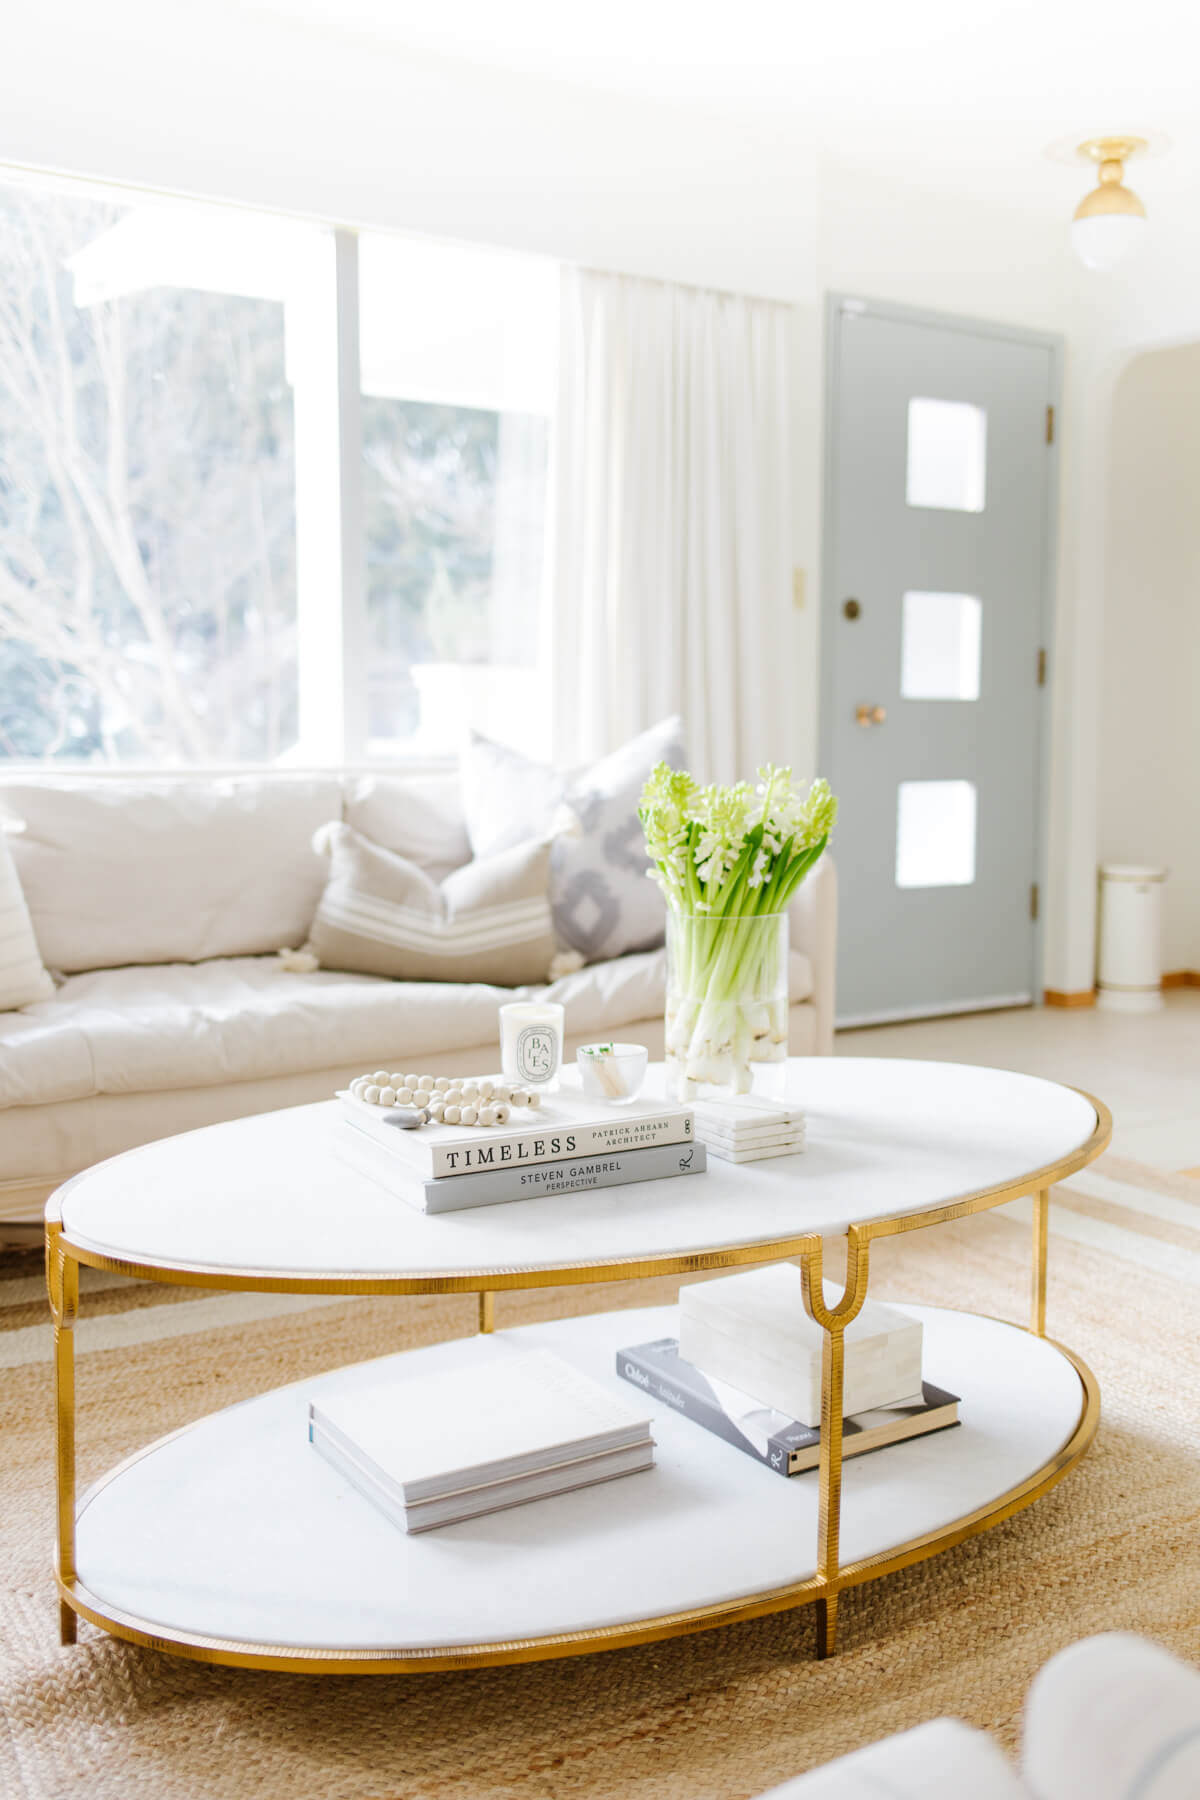 6. Living room in white and beige